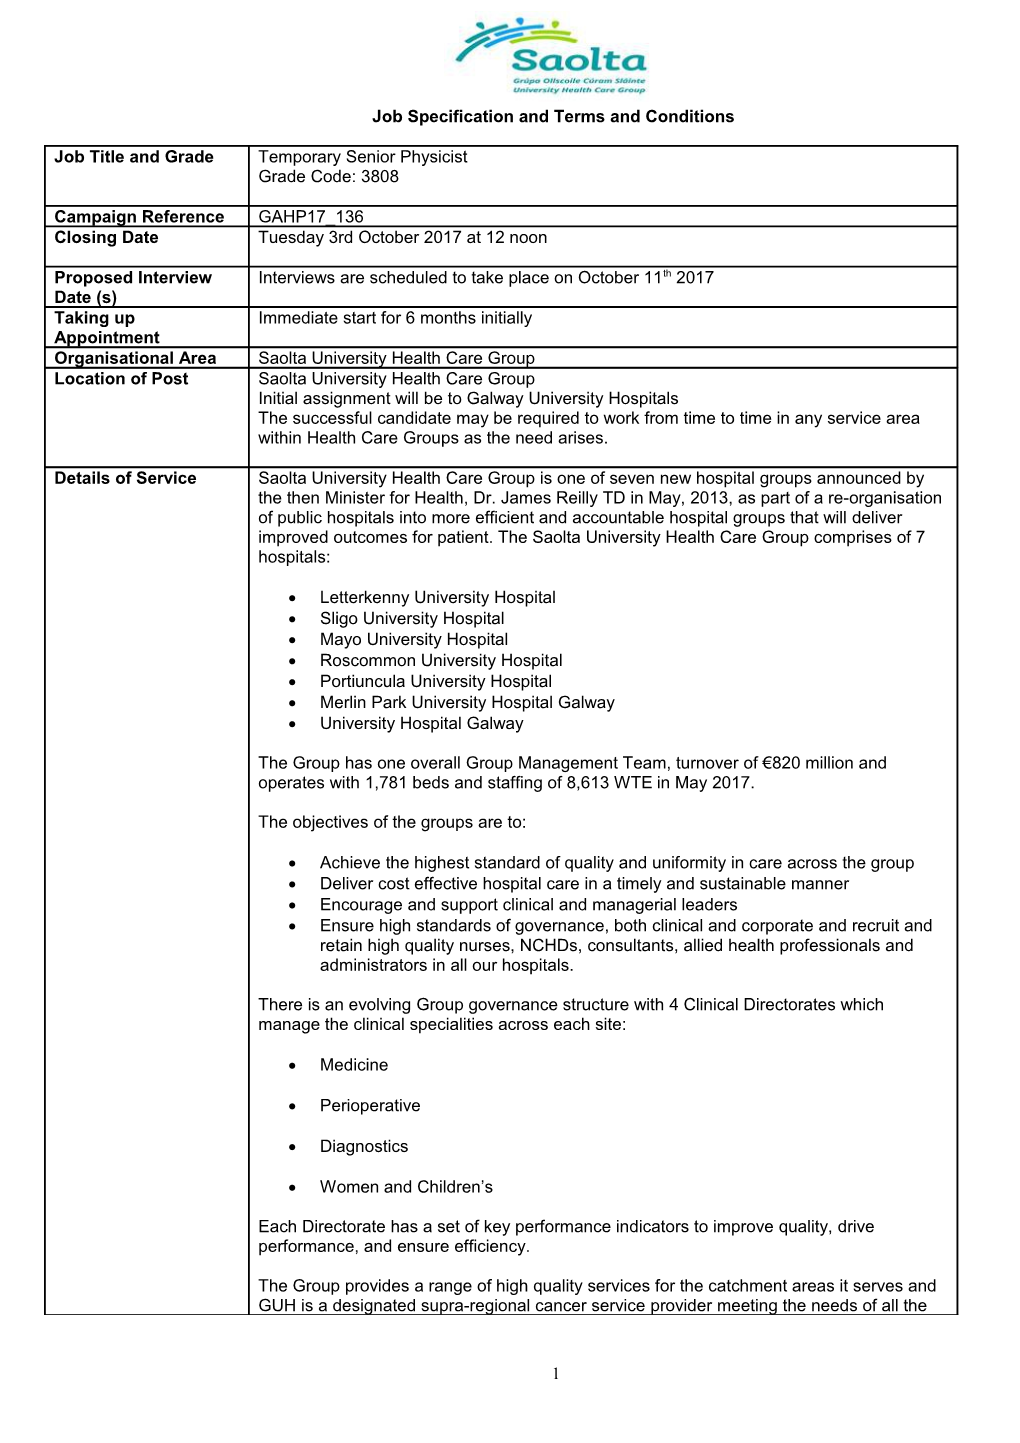 Job Specification and Terms and Conditions s2